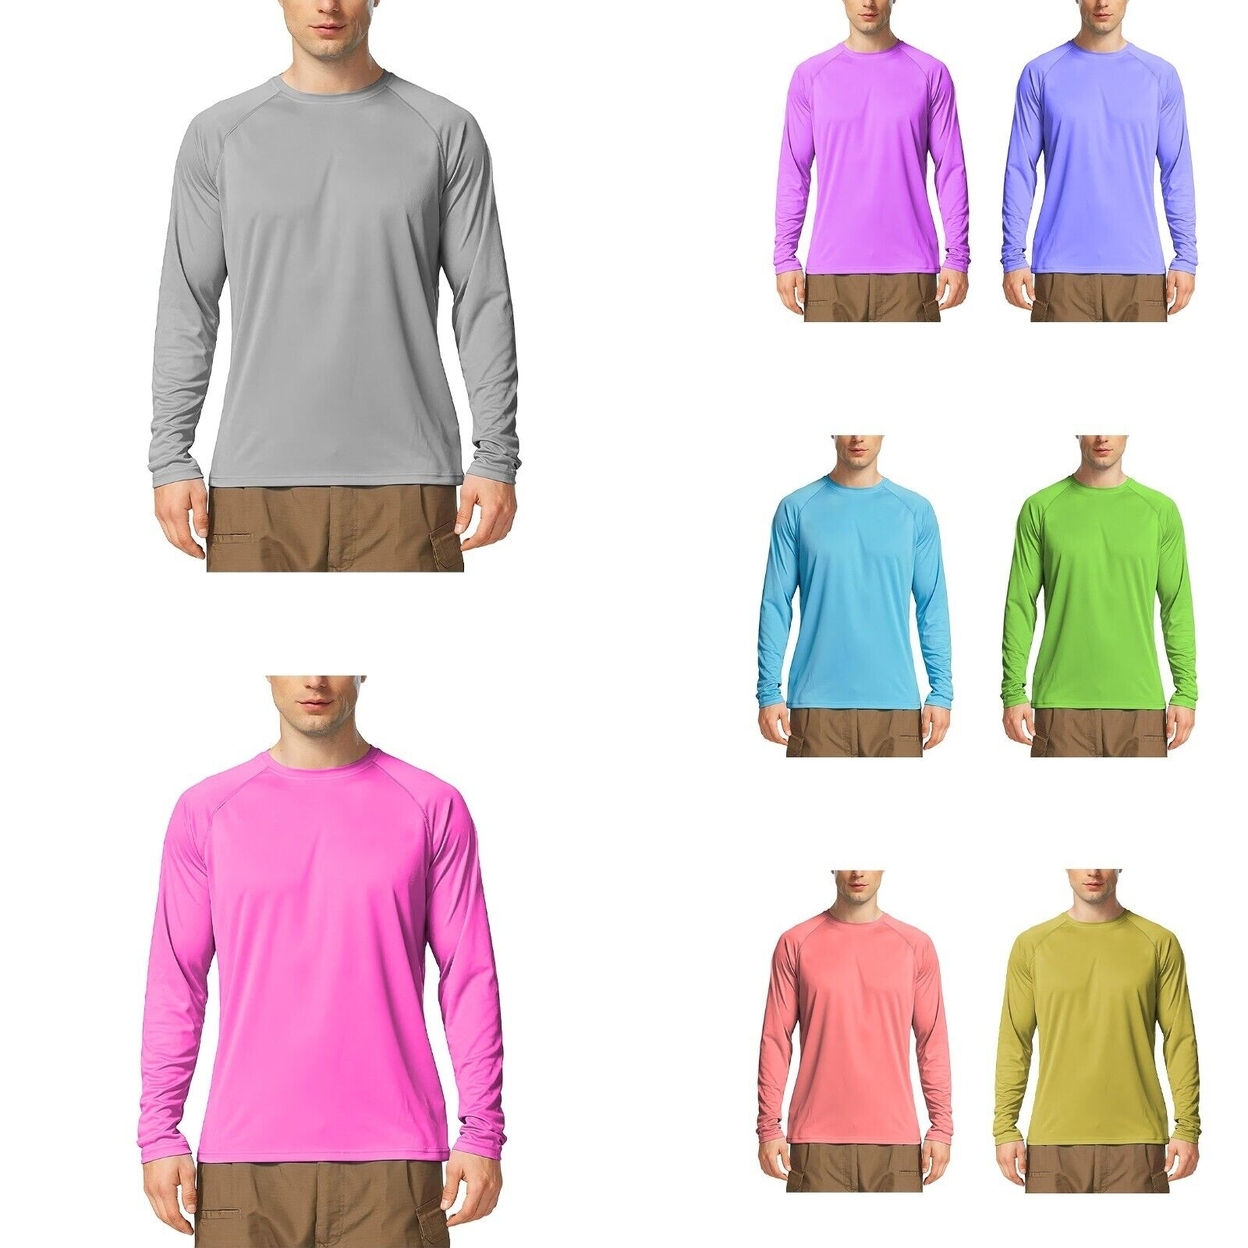 4-Pack: Men's Dri-Fit Moisture Wicking Athletic Cool Performance Slim Fit Long Sleeve T-Shirts - Small